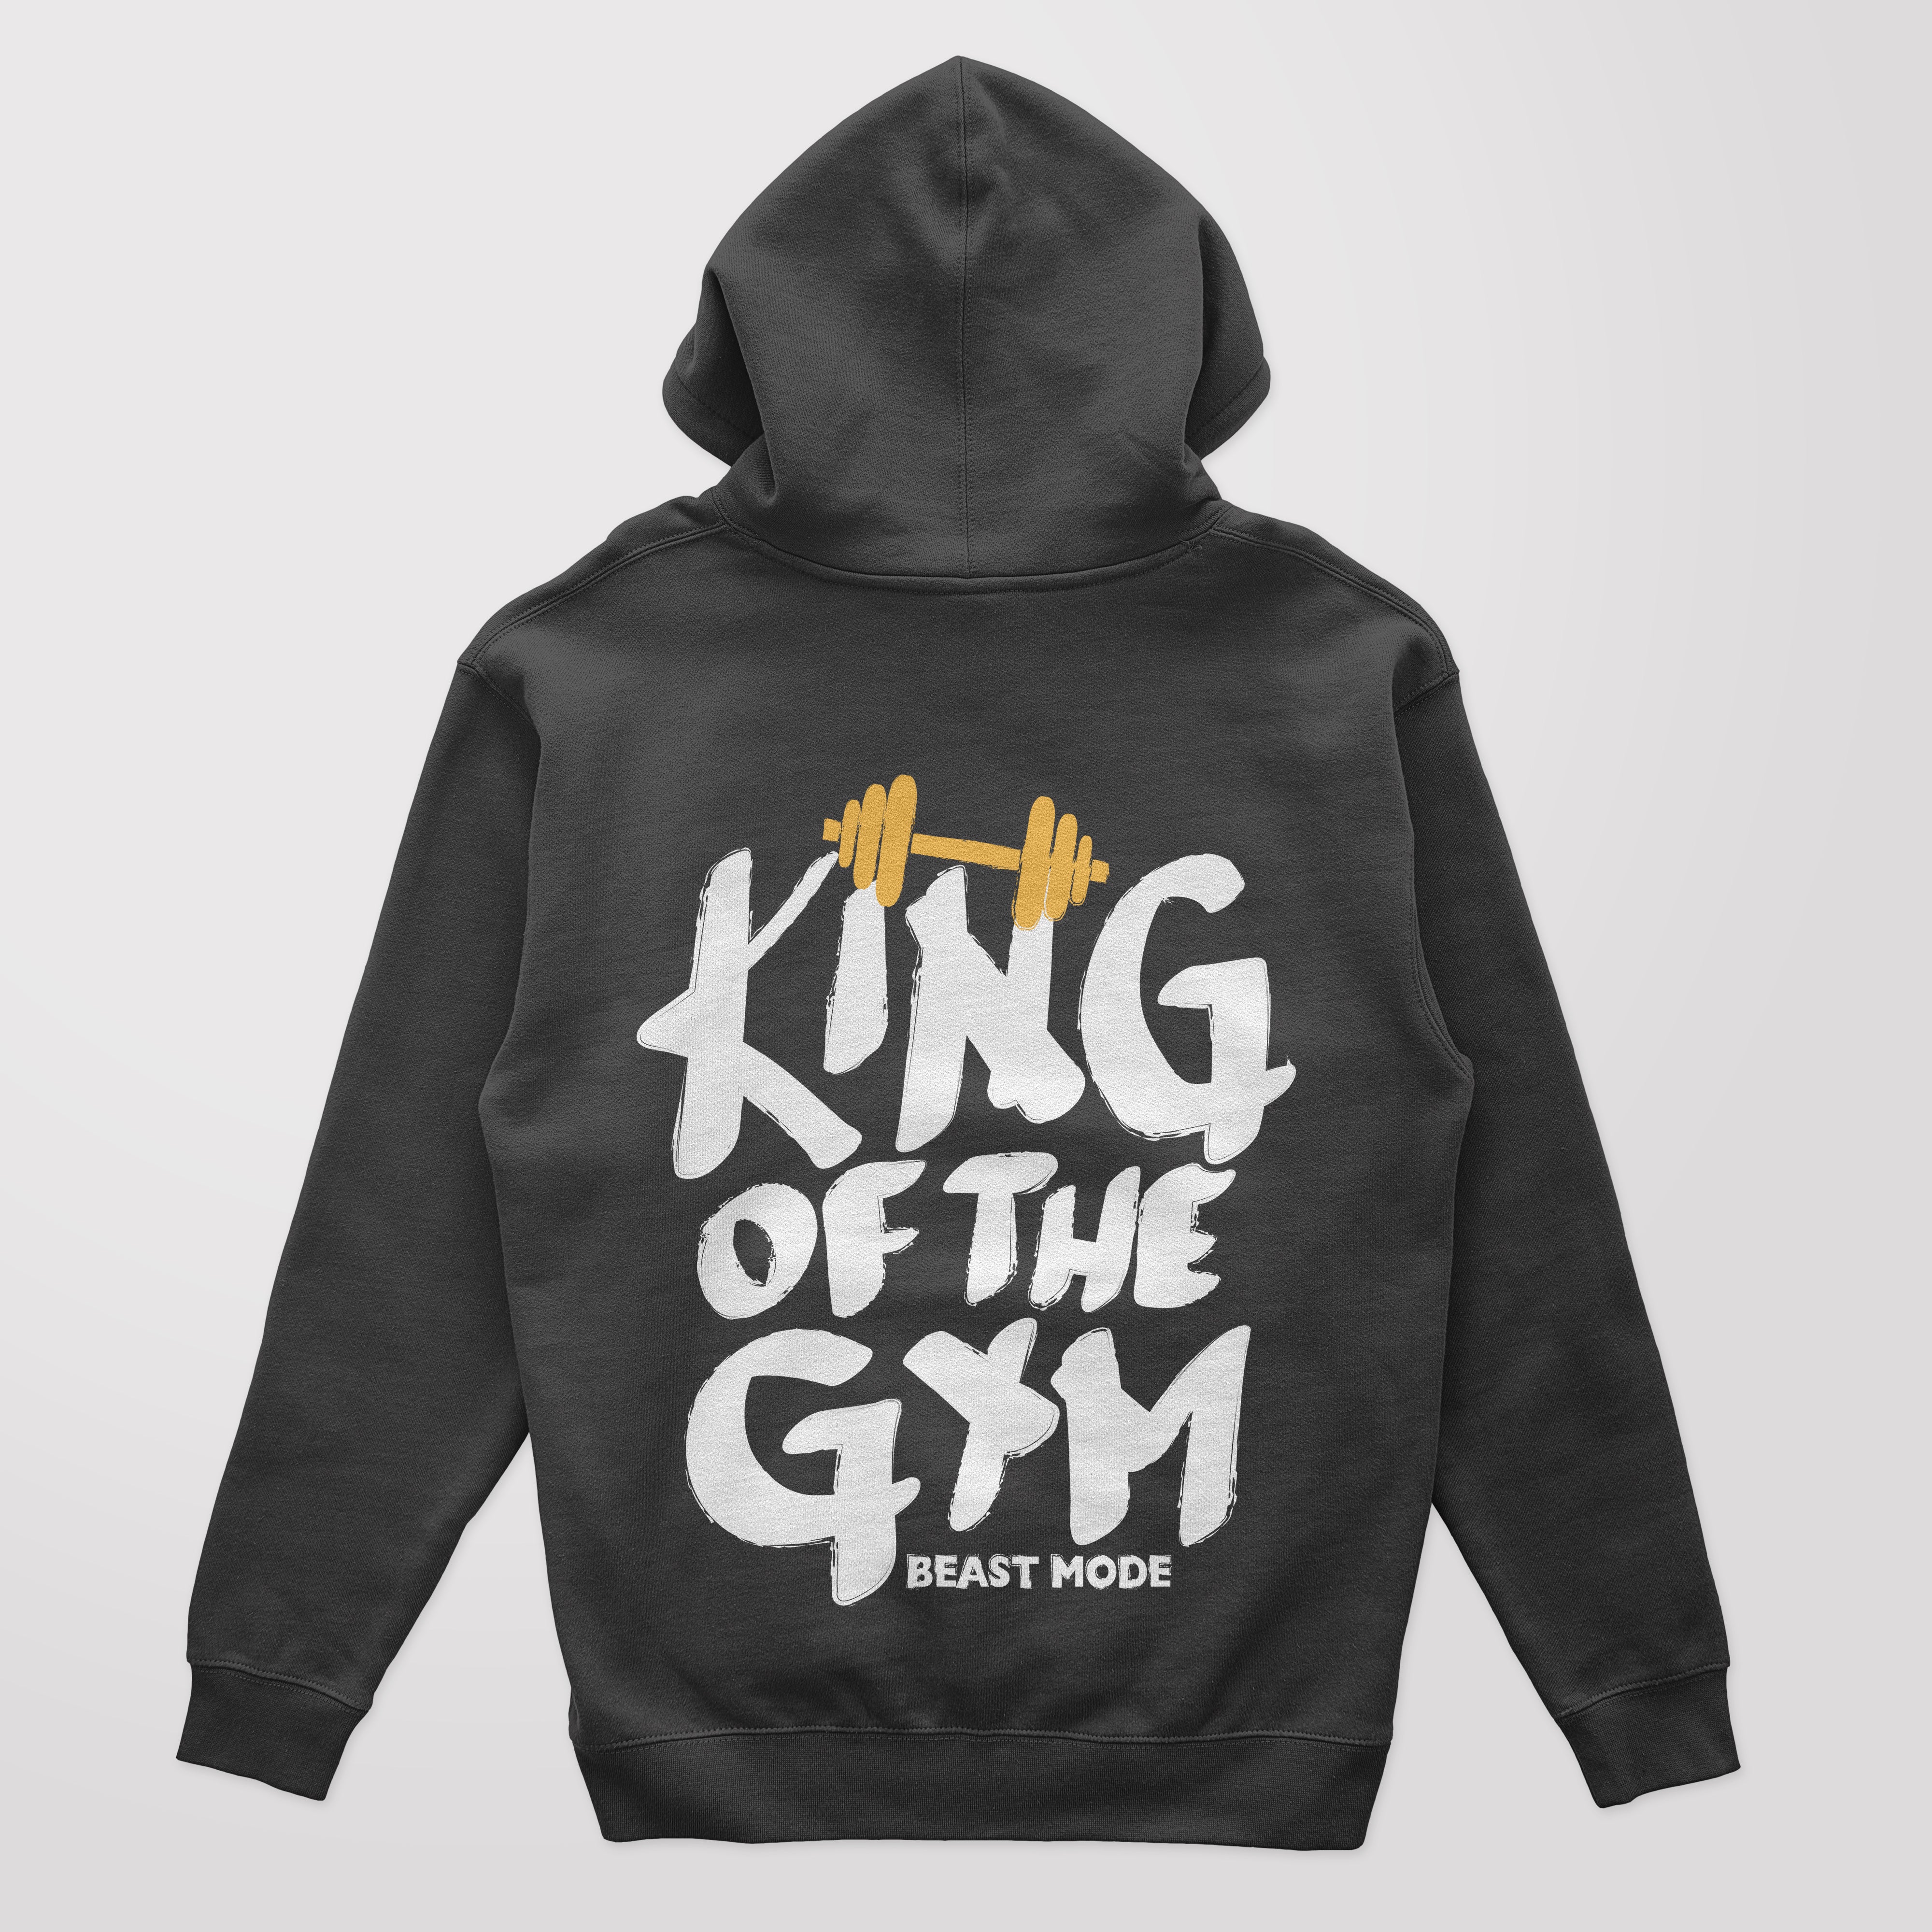 (King of the gym)